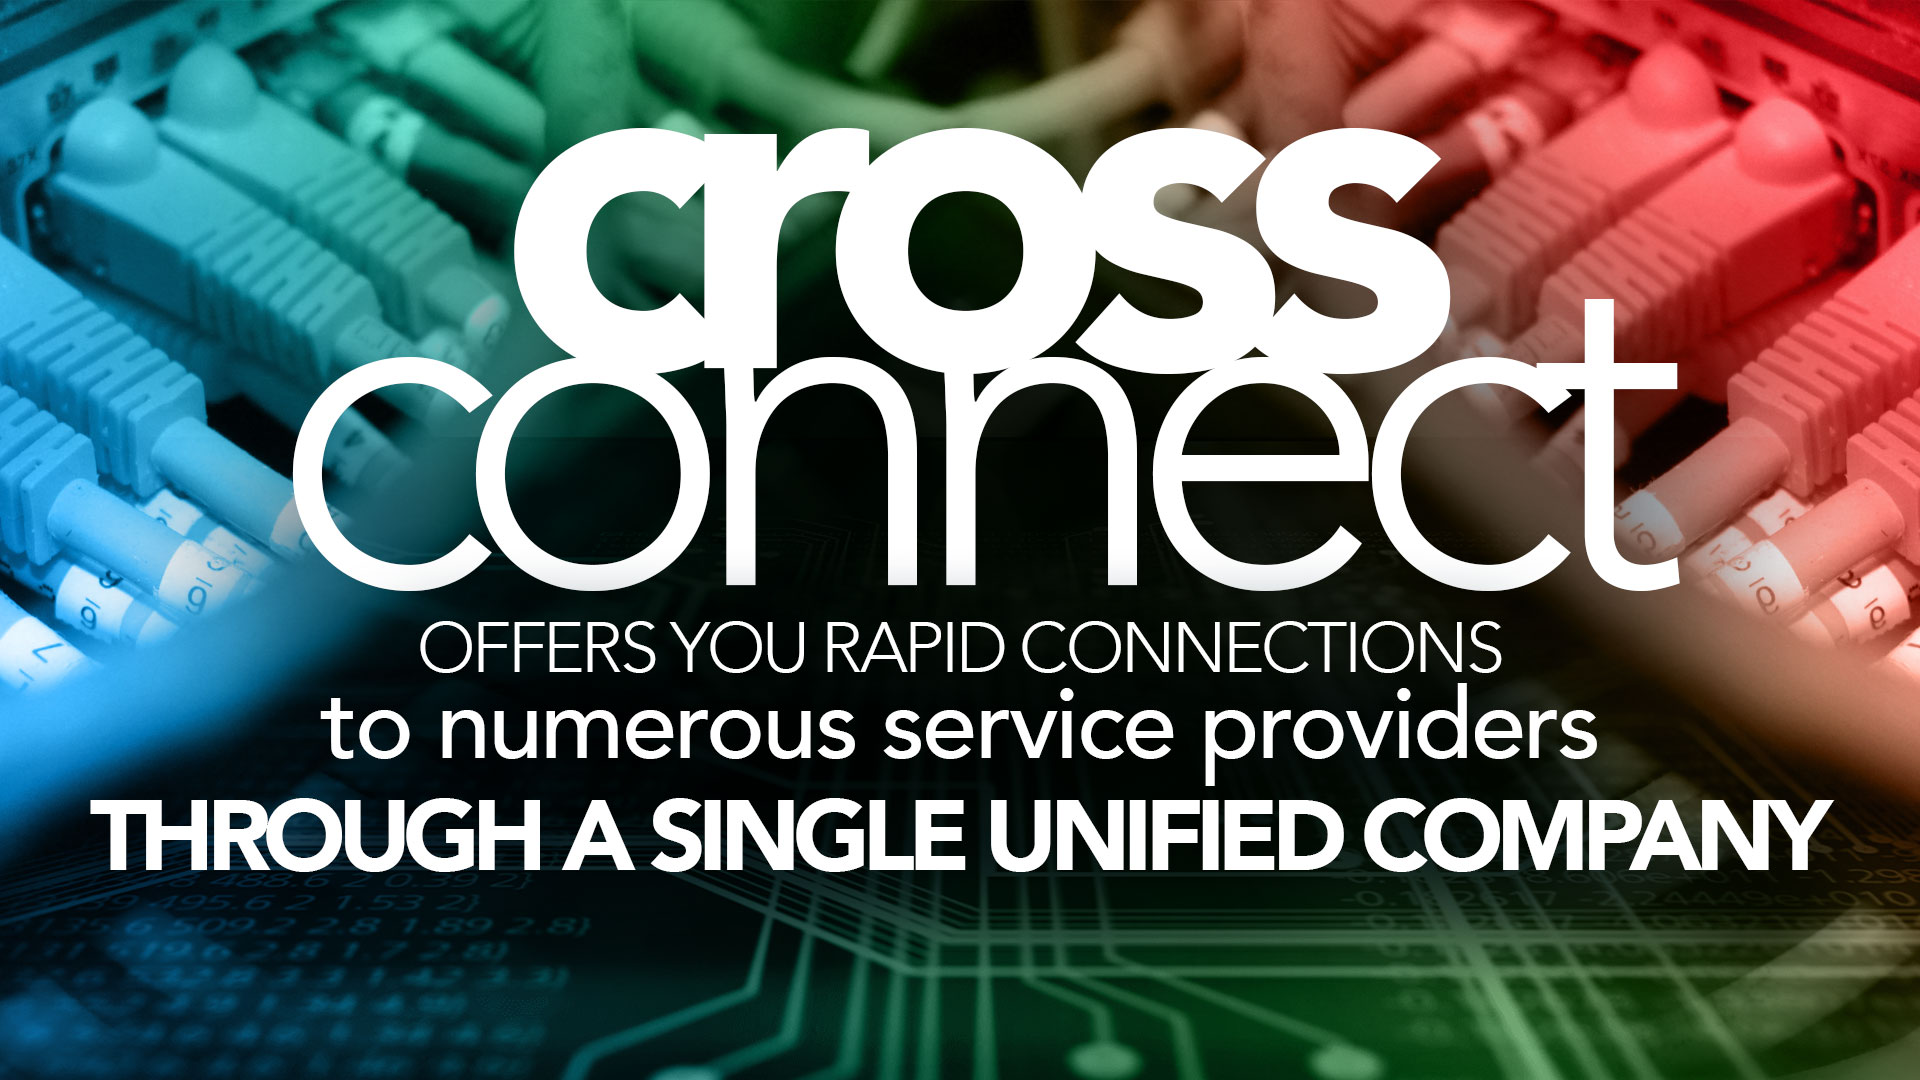 123NET’s Data Centers facilitate your need to be better connected. Cross connects allow you to reduce access costs to get to the carrier of your choosing. You can save money and improve the connectivity of your network.